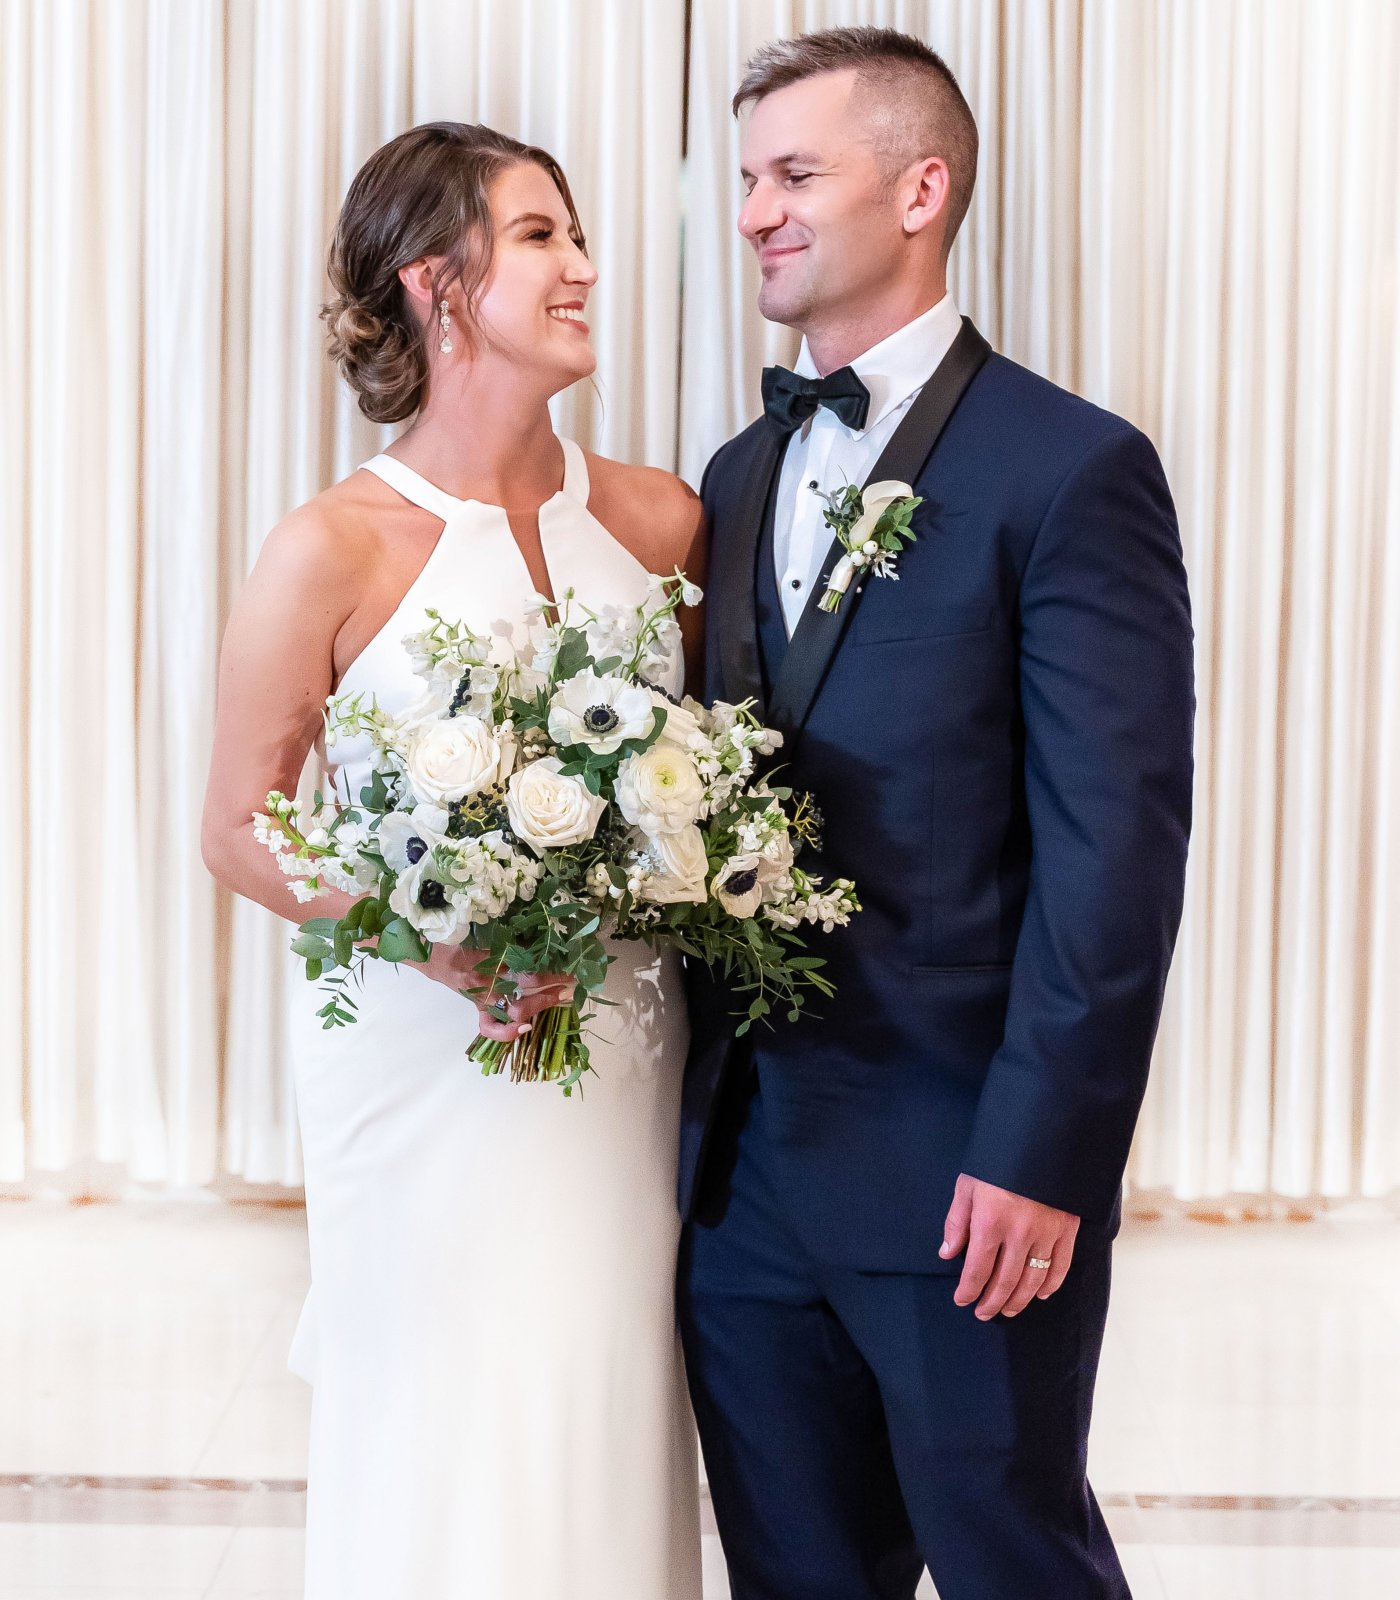 'Married at First Sight' Season 12 couples revealed! Meet the couples and learn all about the